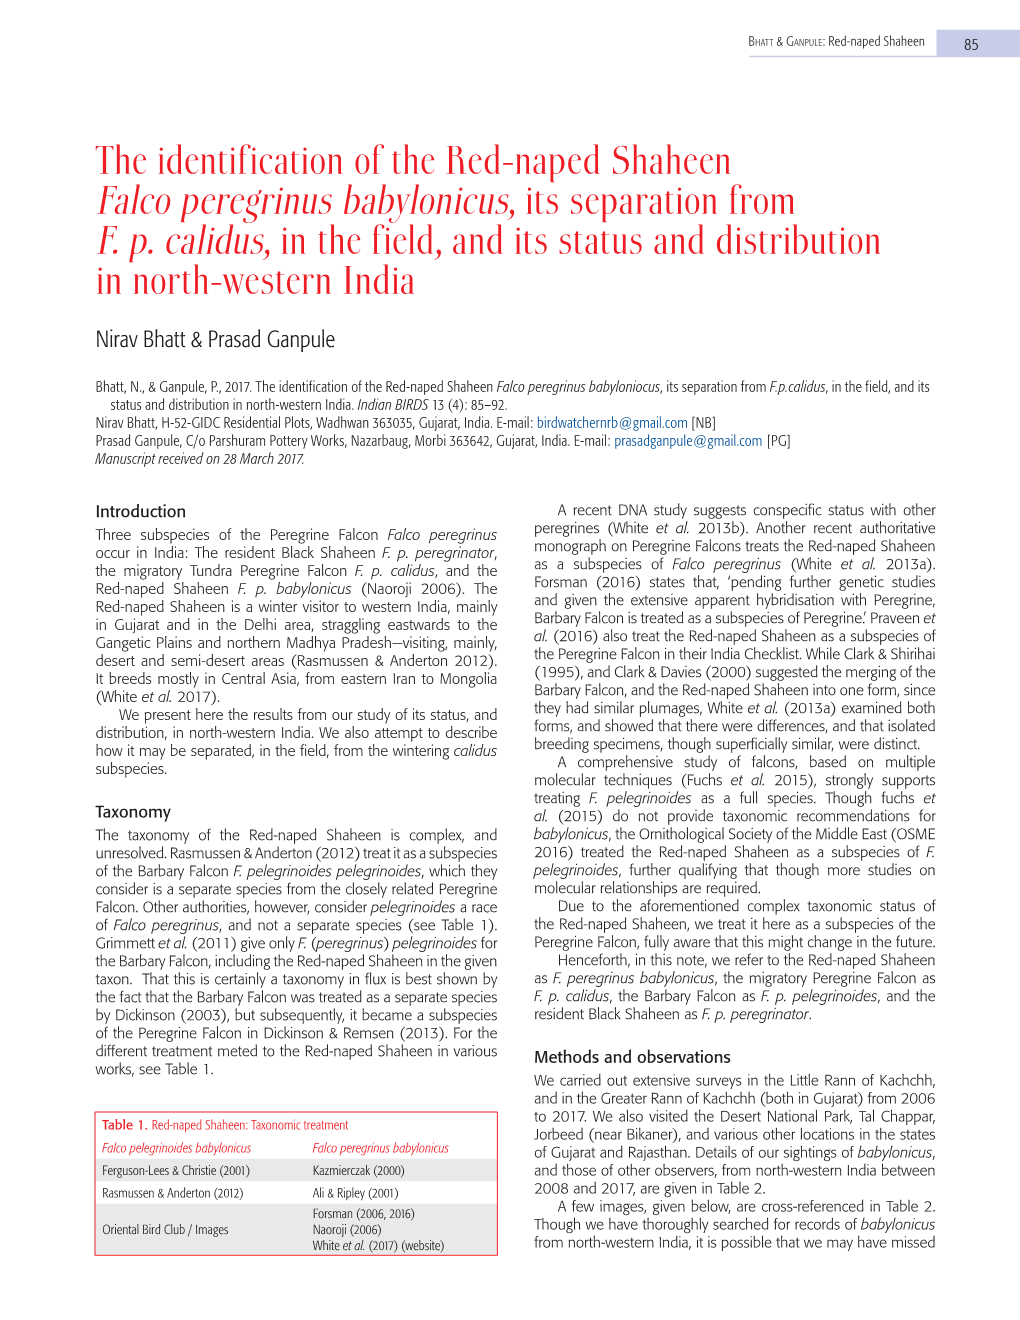 The Identification of the Red-Naped Shaheen Falco Peregrinus Babylonicus, Its Separation from F